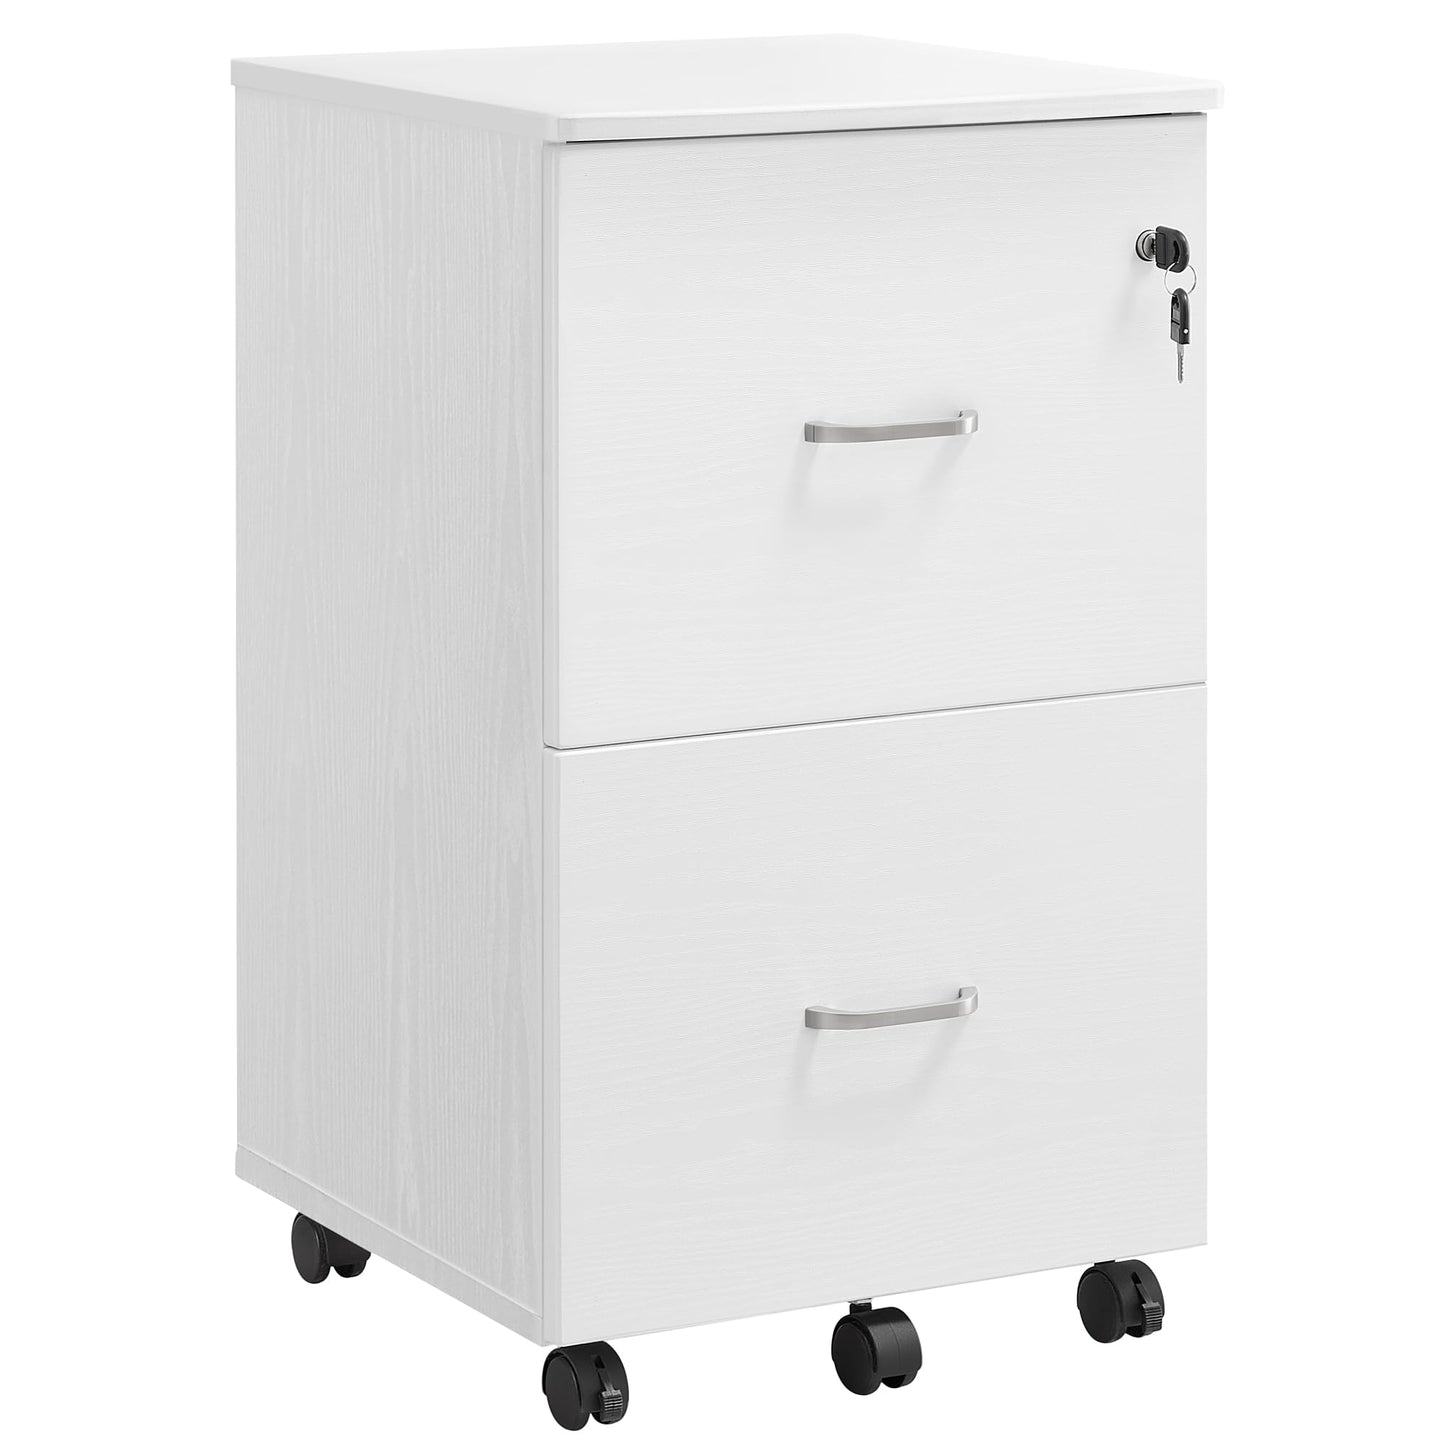 VASAGLE 2-Drawer File Cabinet, Locking Wood Filing Cabinet for Home Office, Small Rolling File Cabinet, Printer Stand, for A4, Letter-Size Files,